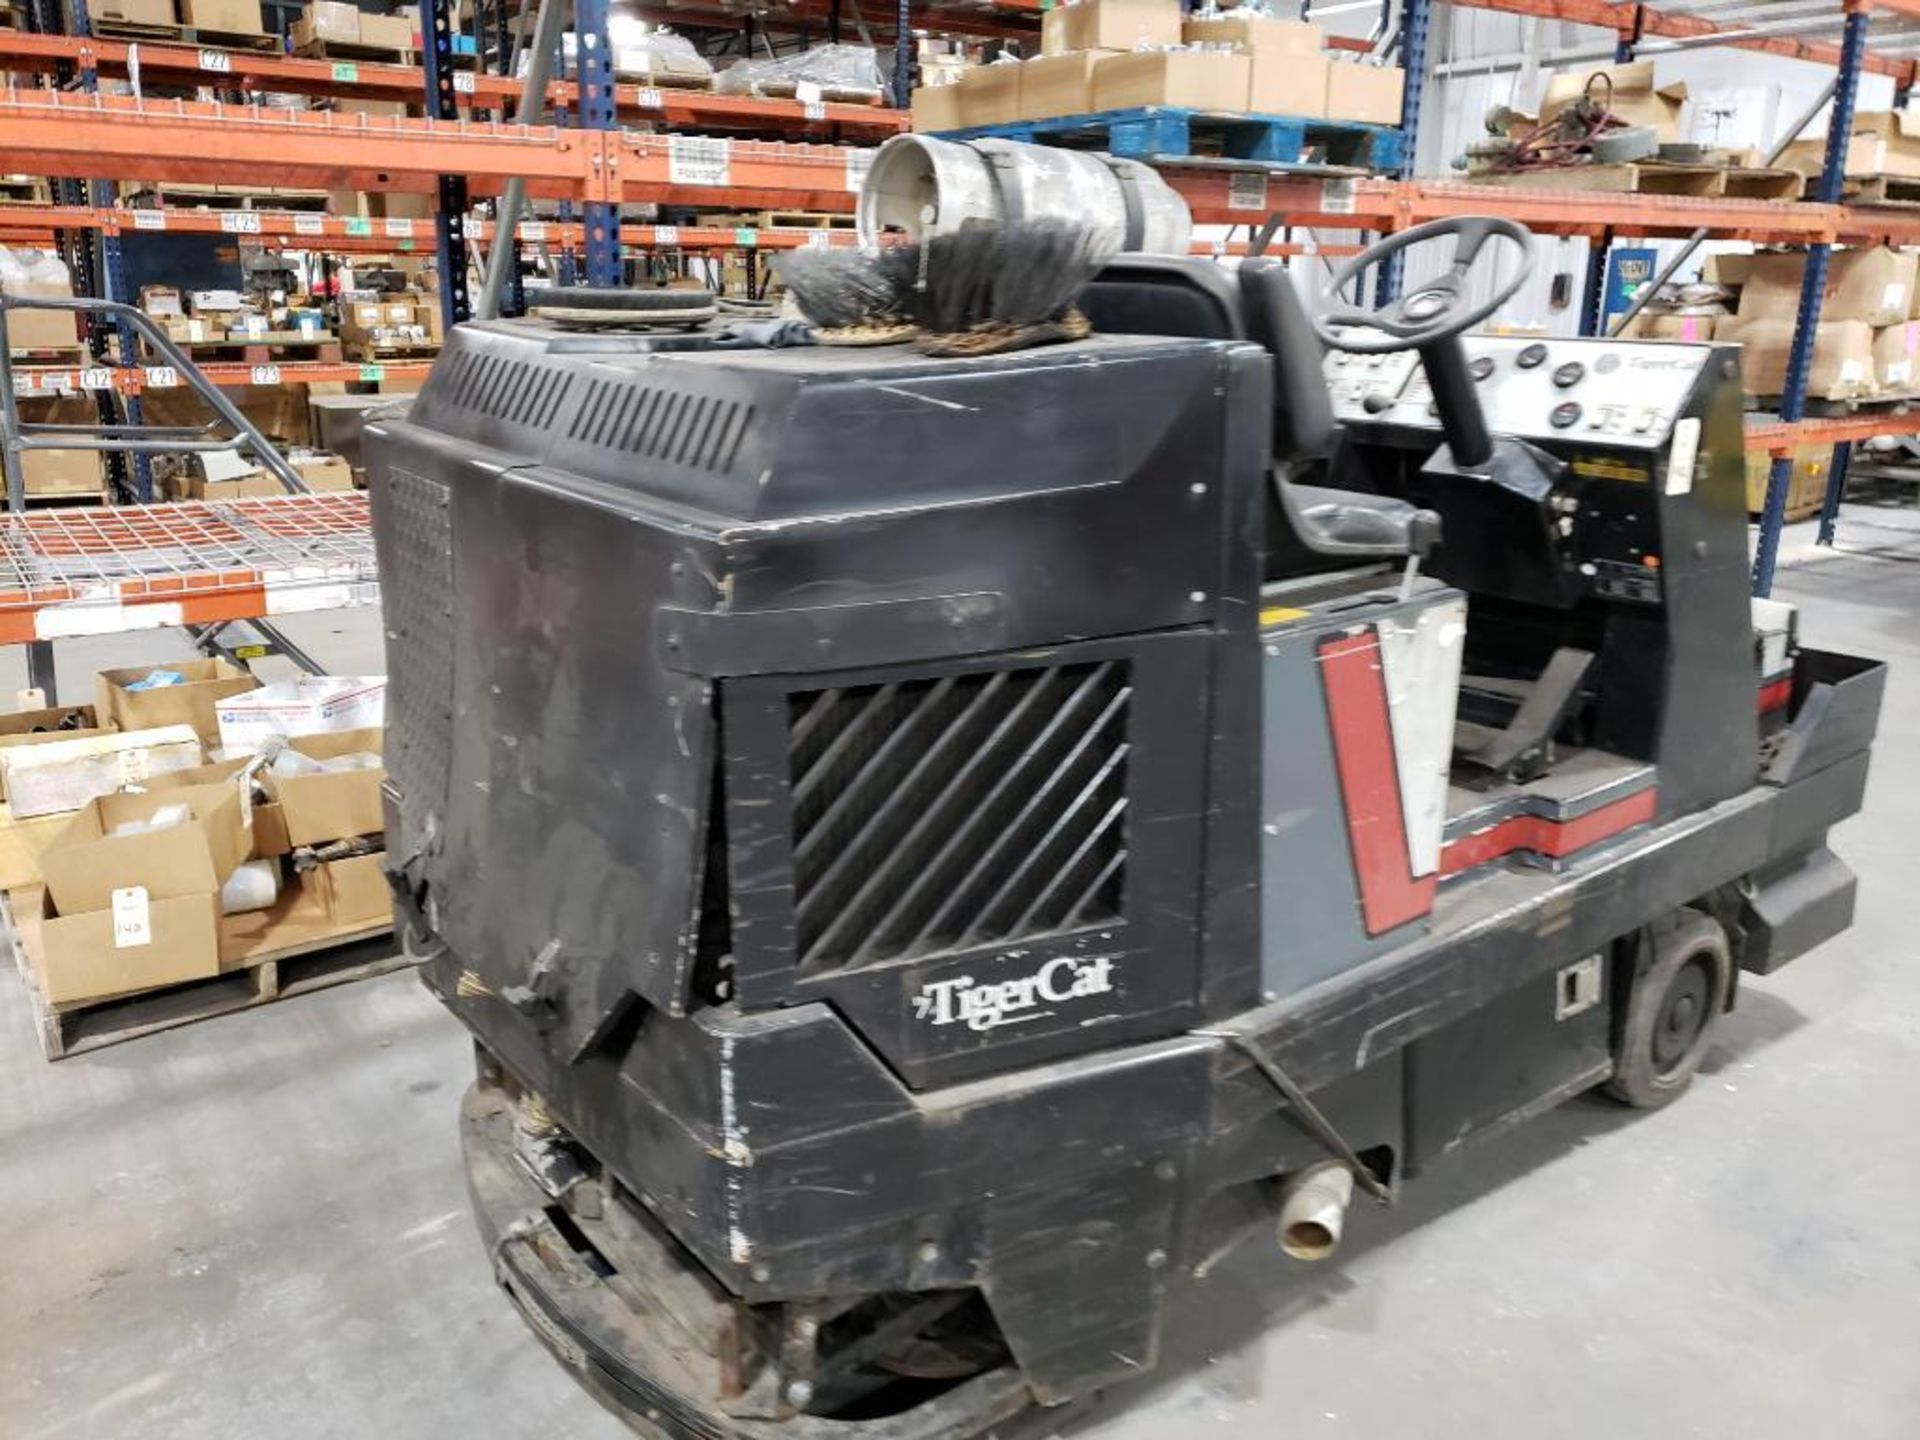 Advance Tiger Cat propane ride on sweeper. Model 462000. Serial 454516. - Image 25 of 25